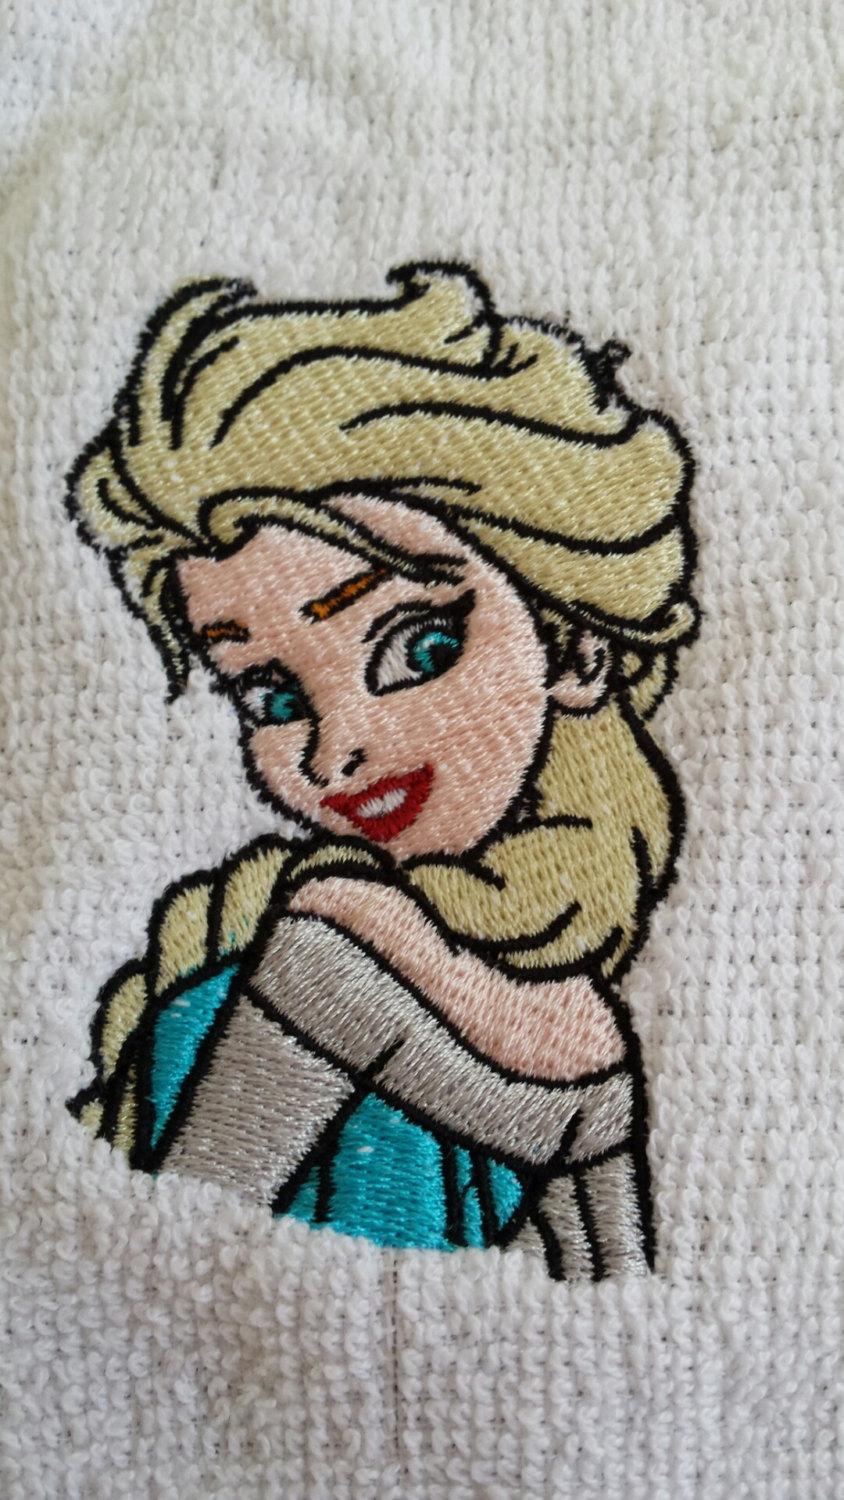 Towel with Elsa embroidery design